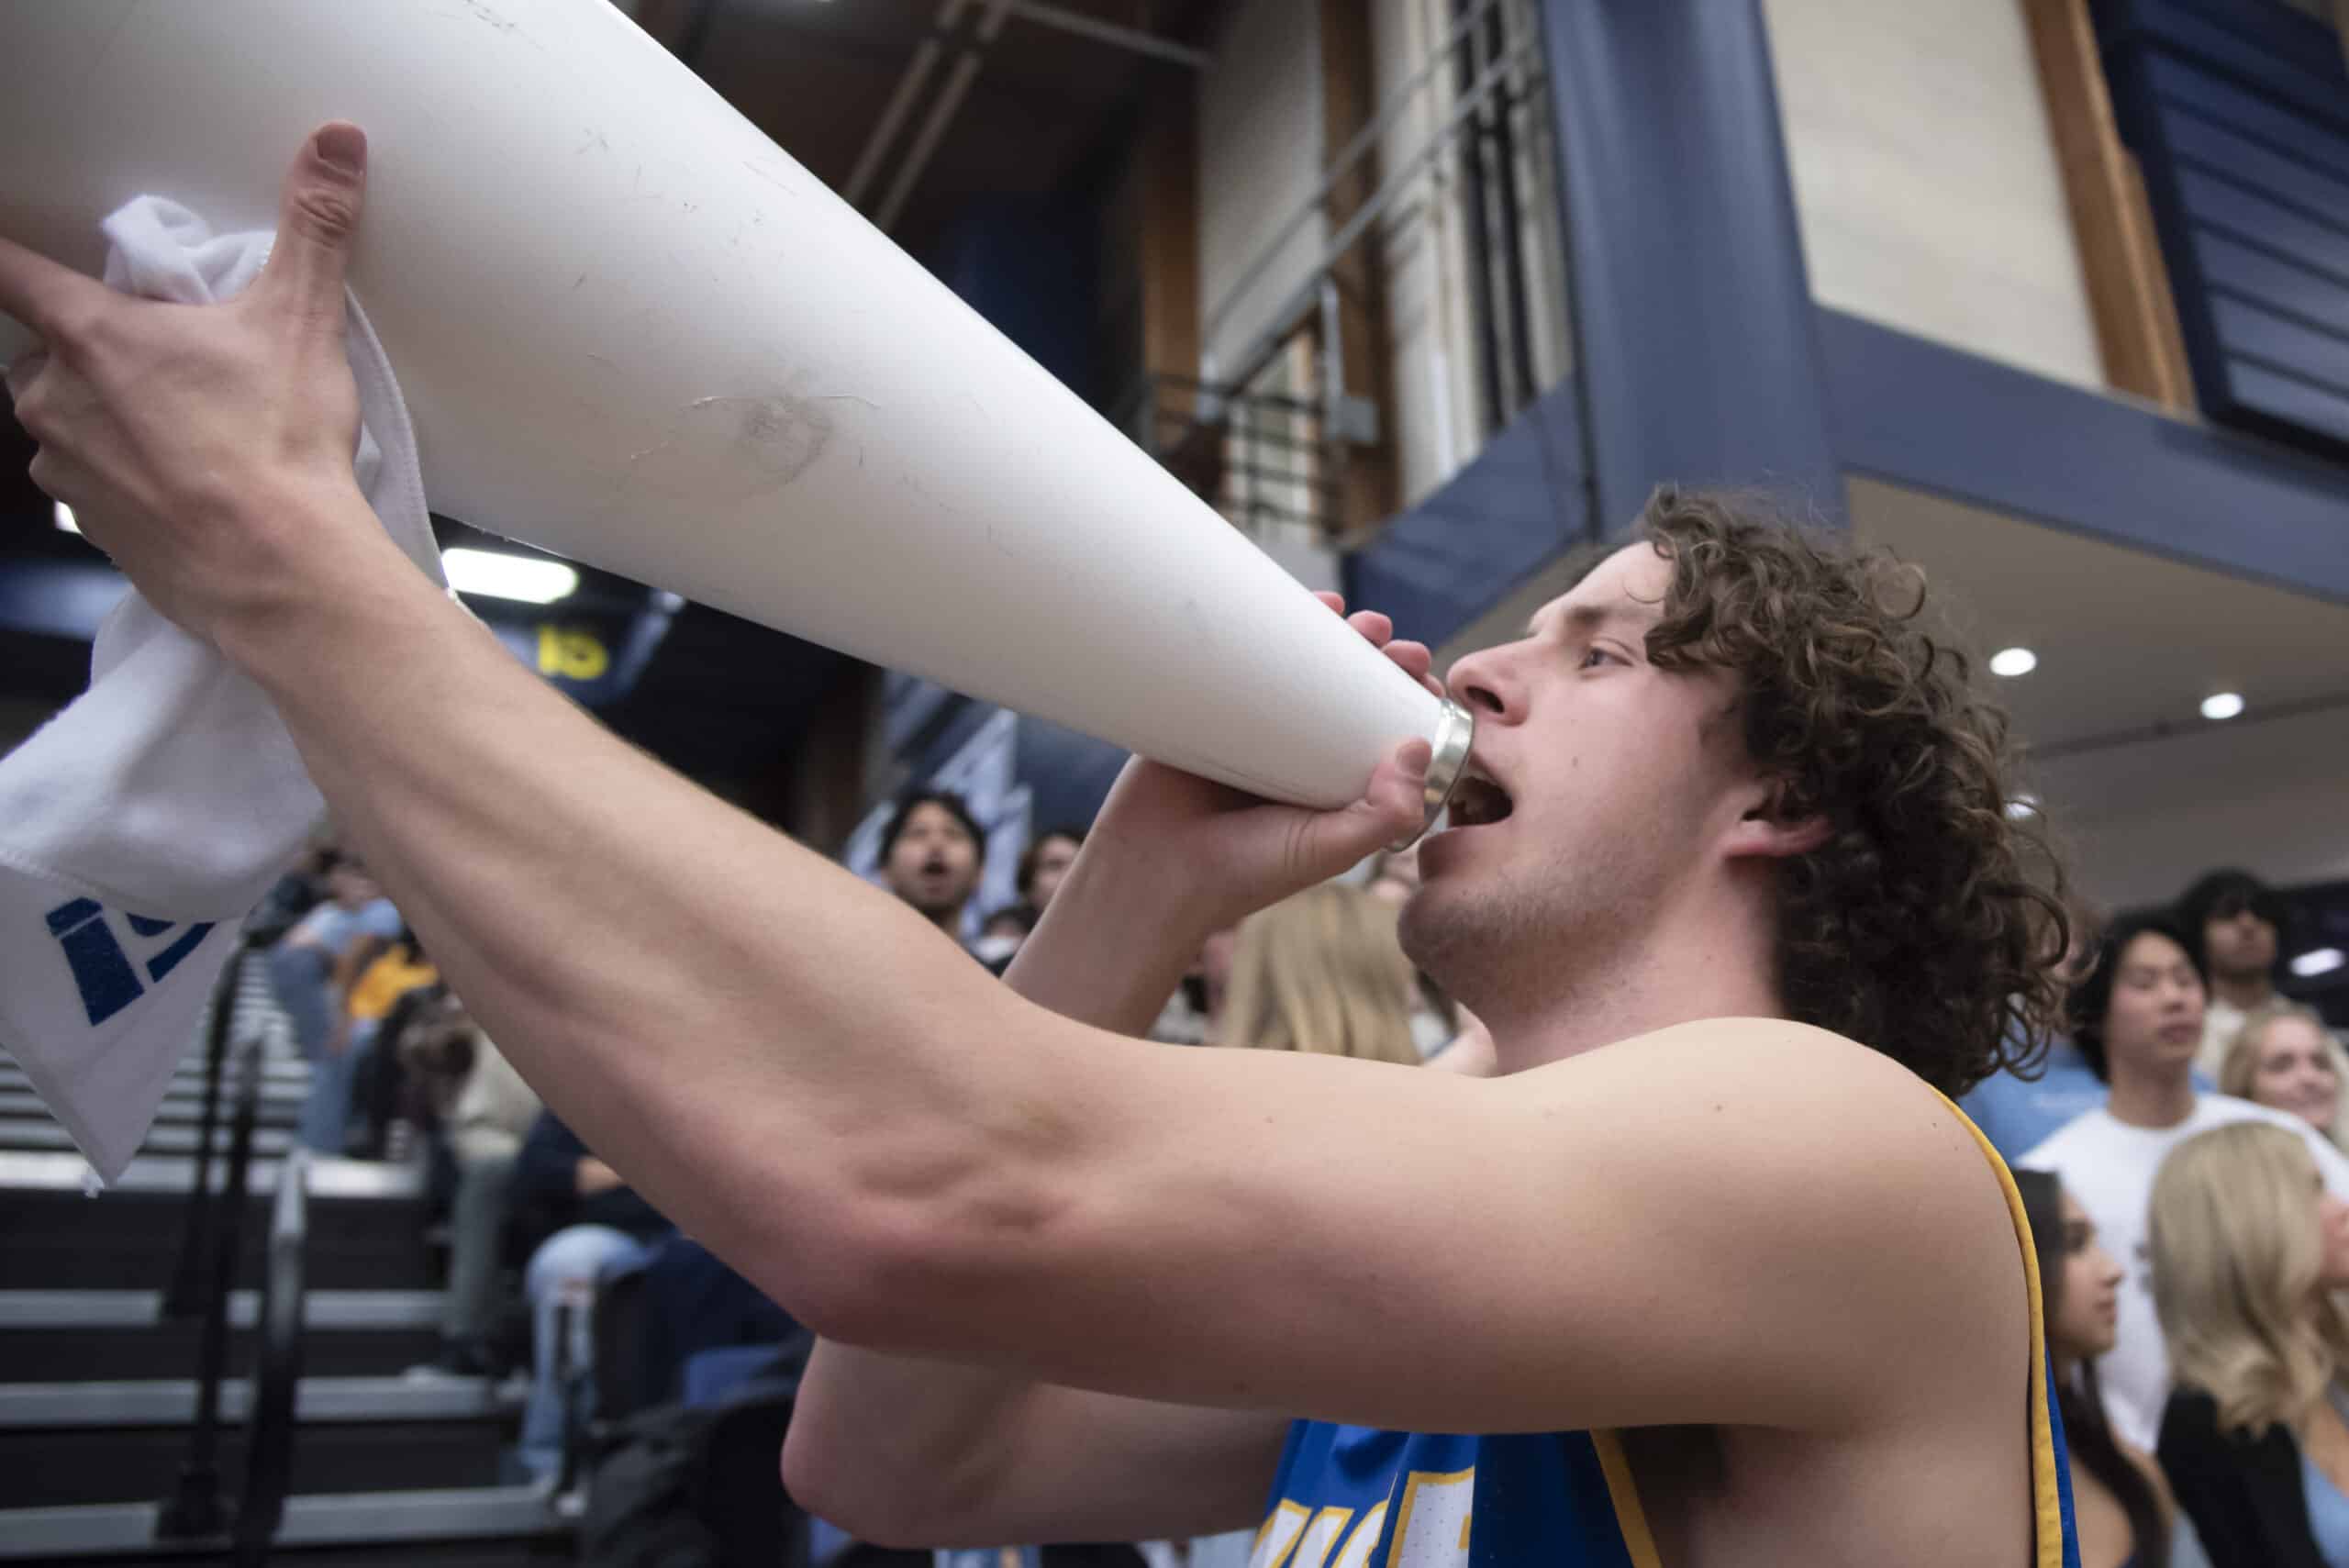 University of California Santa Barbara student section leader holding a megaphone and leading cheers.